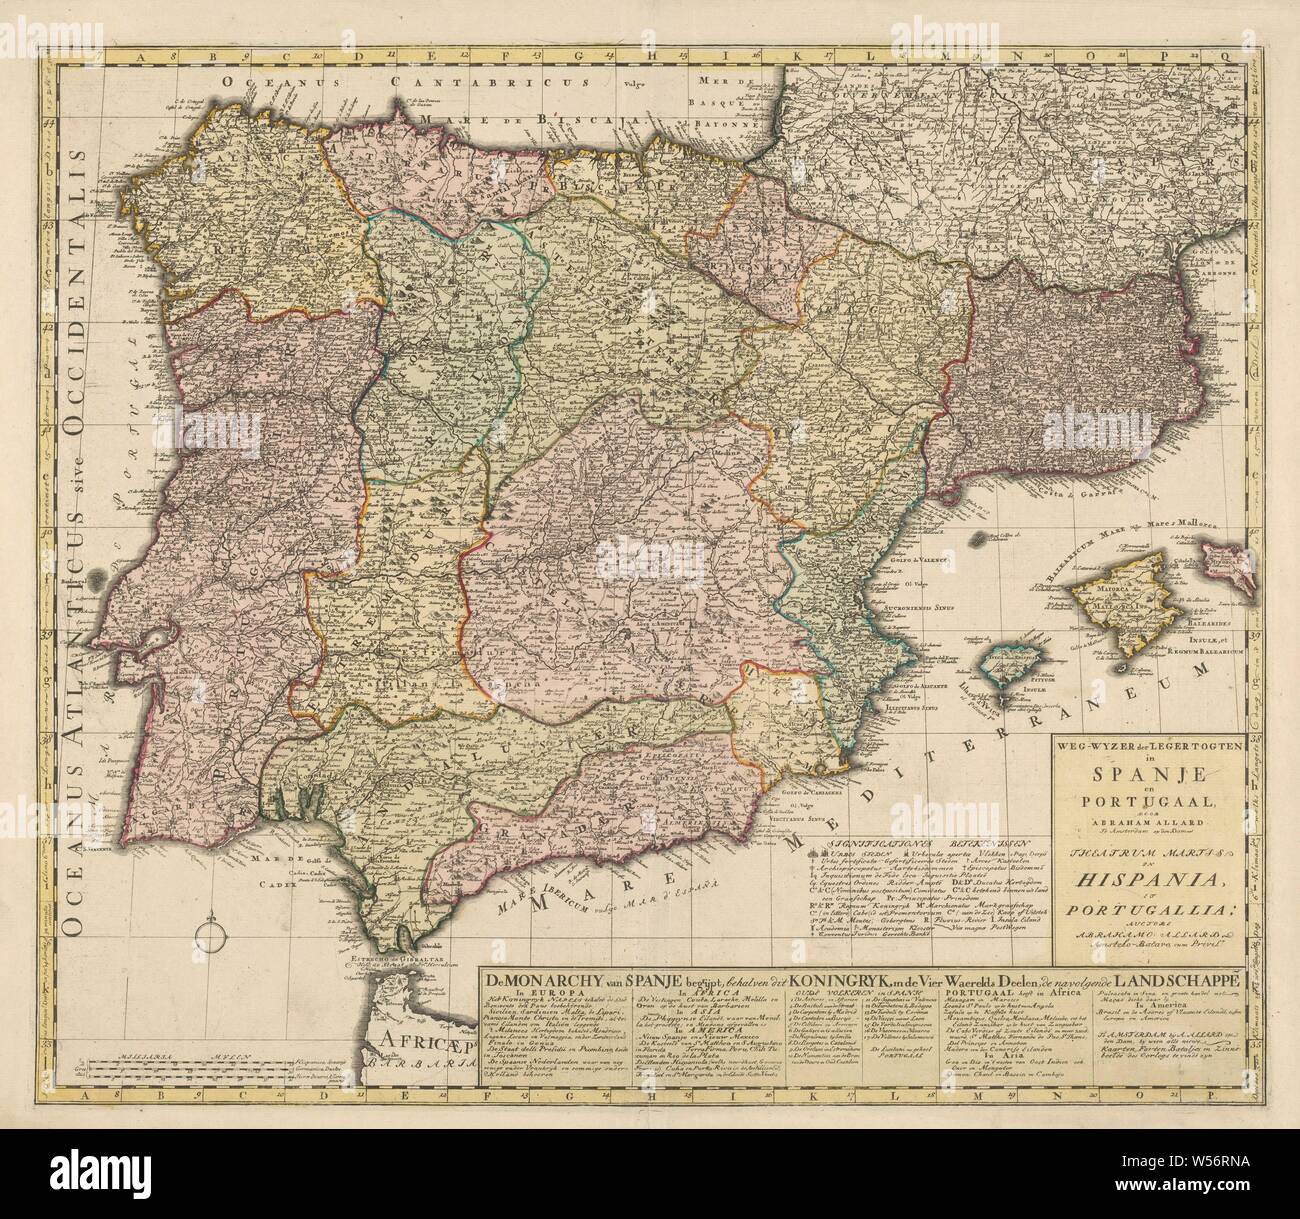 Cartography in the Netherlands, map of Spain and Portugal, Map of Spain and Portugal, colored areas, yellow borders. R.o. legend, m.o. to r.o. text (enumeration in six columns that also include Portugal's possessions). L.o. compass rose and scale in Spanish and German miles and times. Inscription, r.o .: -WHERE OF THE ARMY DOGS / in SPAIN / en / PORTUGAL - THEATER MARTIS / IN / HISPANIA / ET / PORTUGALIA. Signed, r.o .: By ABRAHAM ALLARD / AUCTORE ABRAHAMO ALLARD., Abraham Allard, Amsterdam, 1675 - 1725, paper, engraving, h 50.4 cm × w 58.6 cm Stock Photo